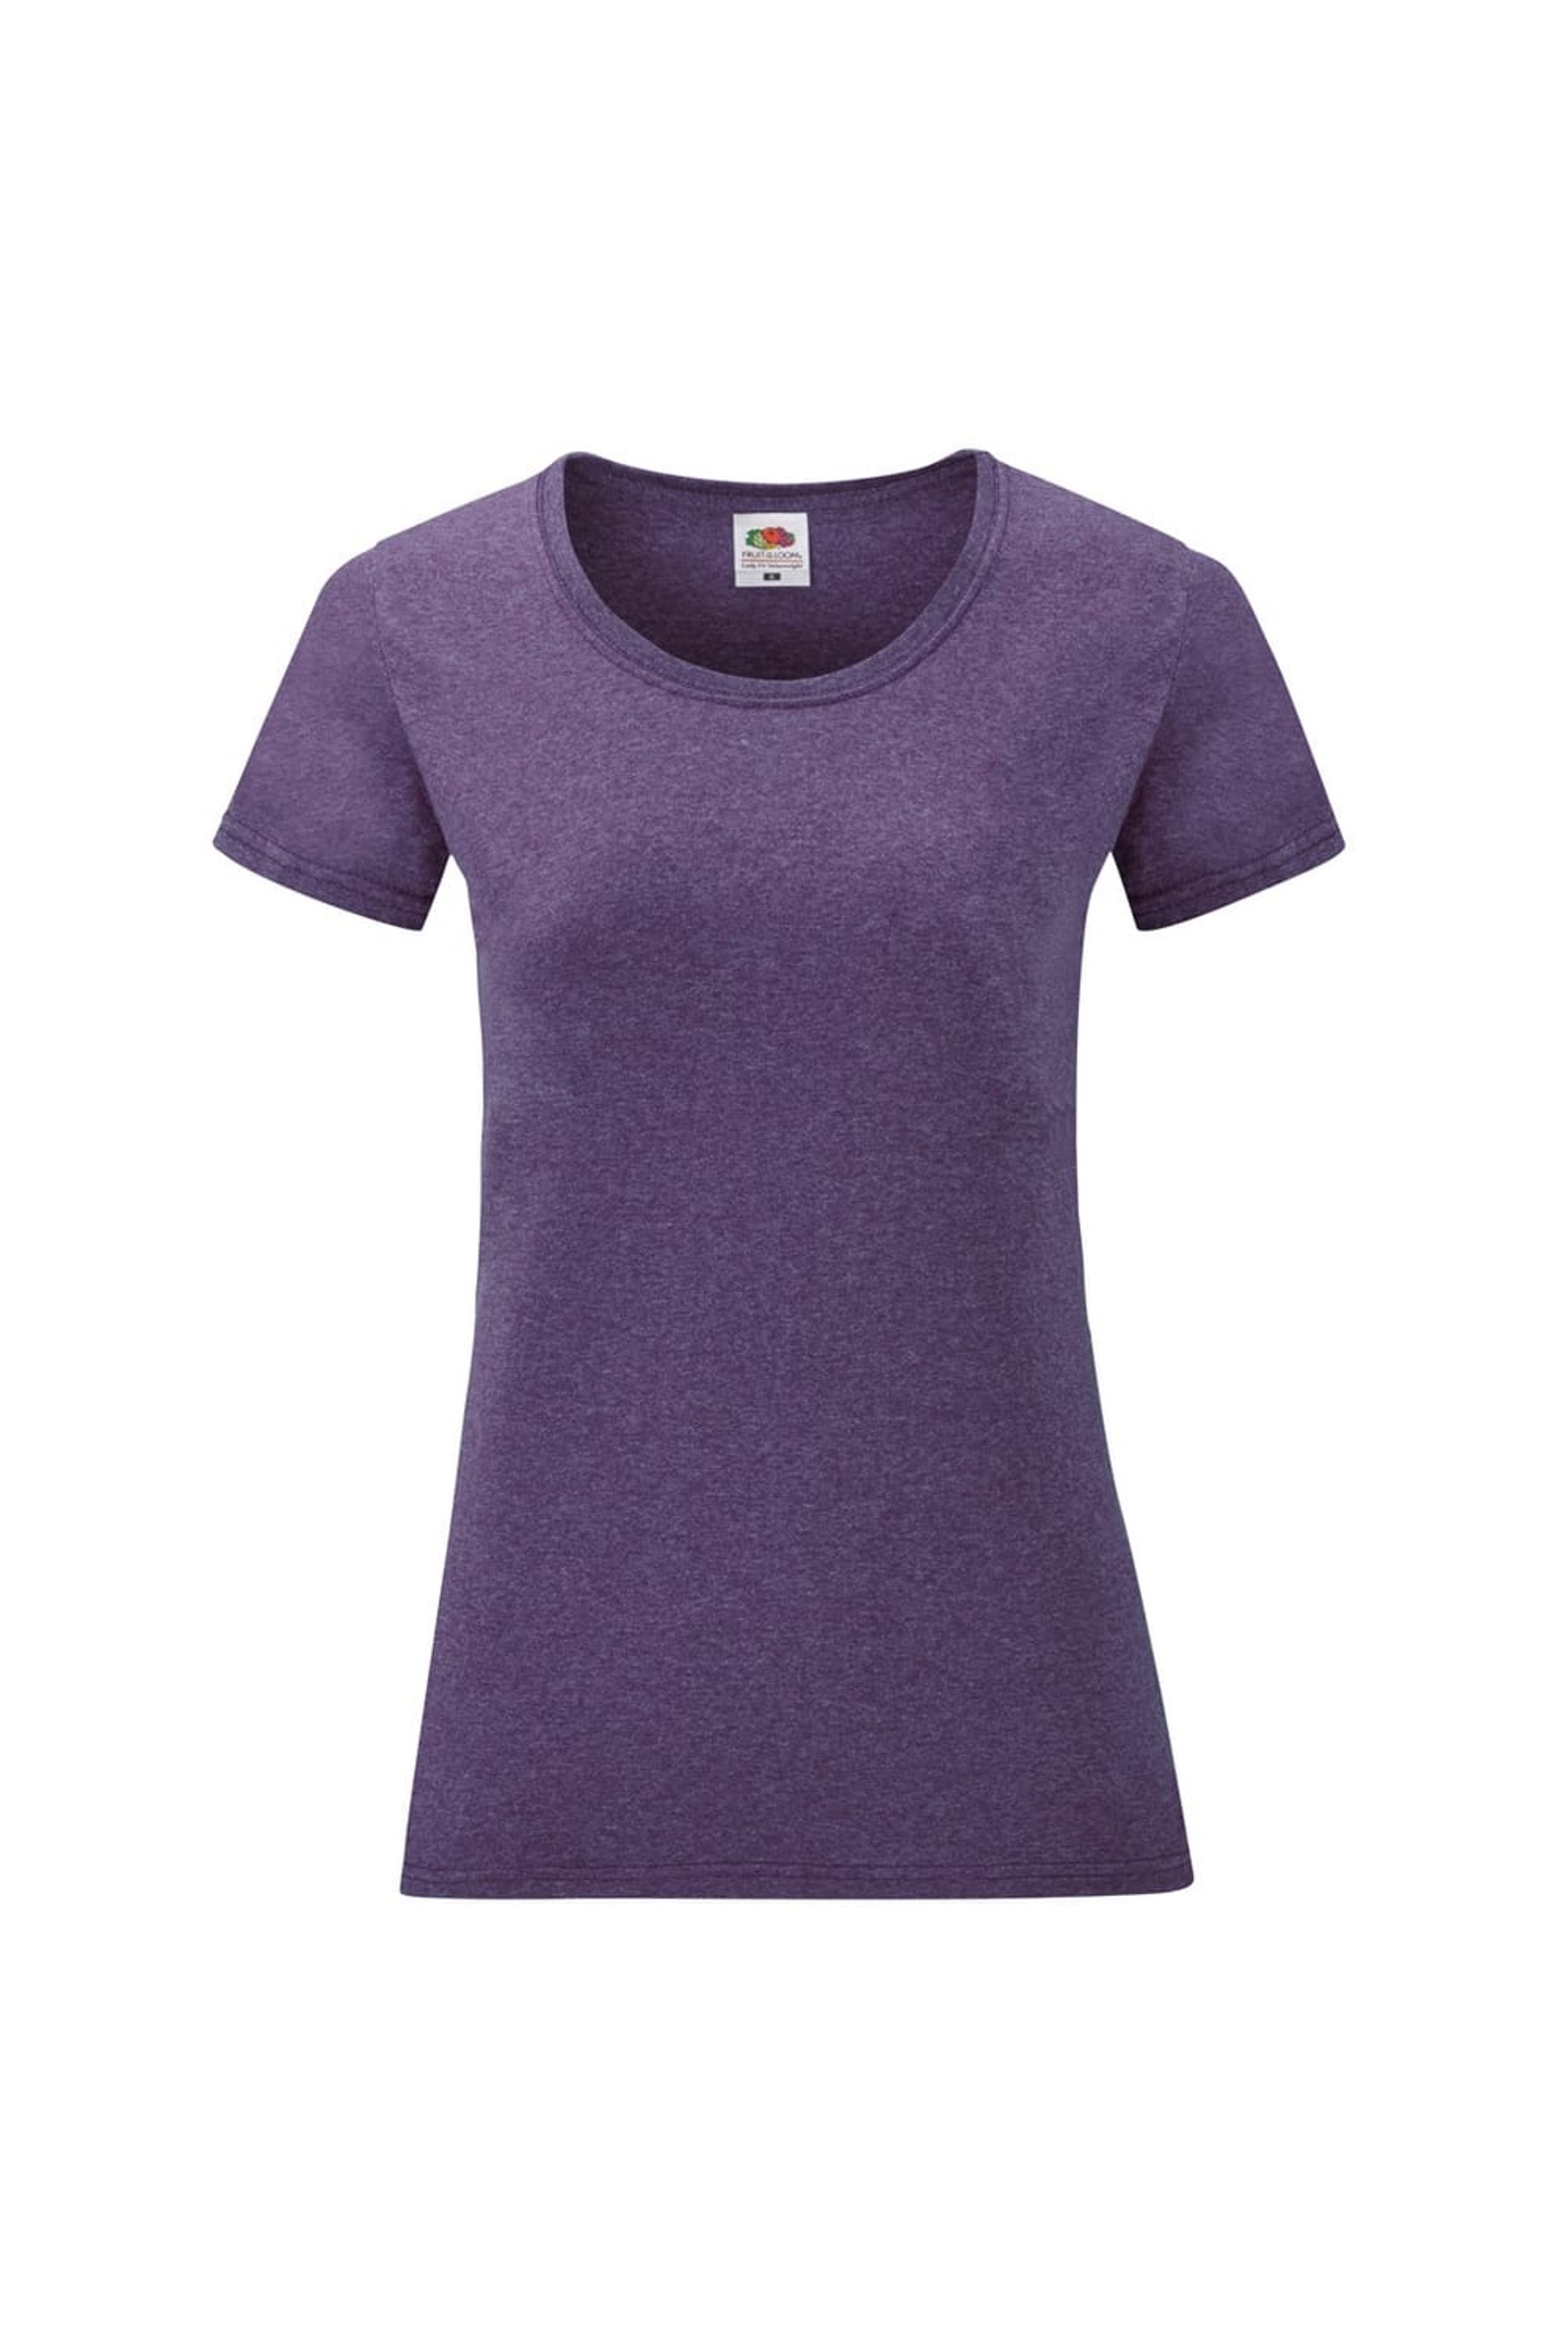 FRUIT OF THE LOOM FRUIT OF THE LOOM LADIES/WOMENS LADY-FIT VALUEWEIGHT SHORT SLEEVE T-SHIRT PACK